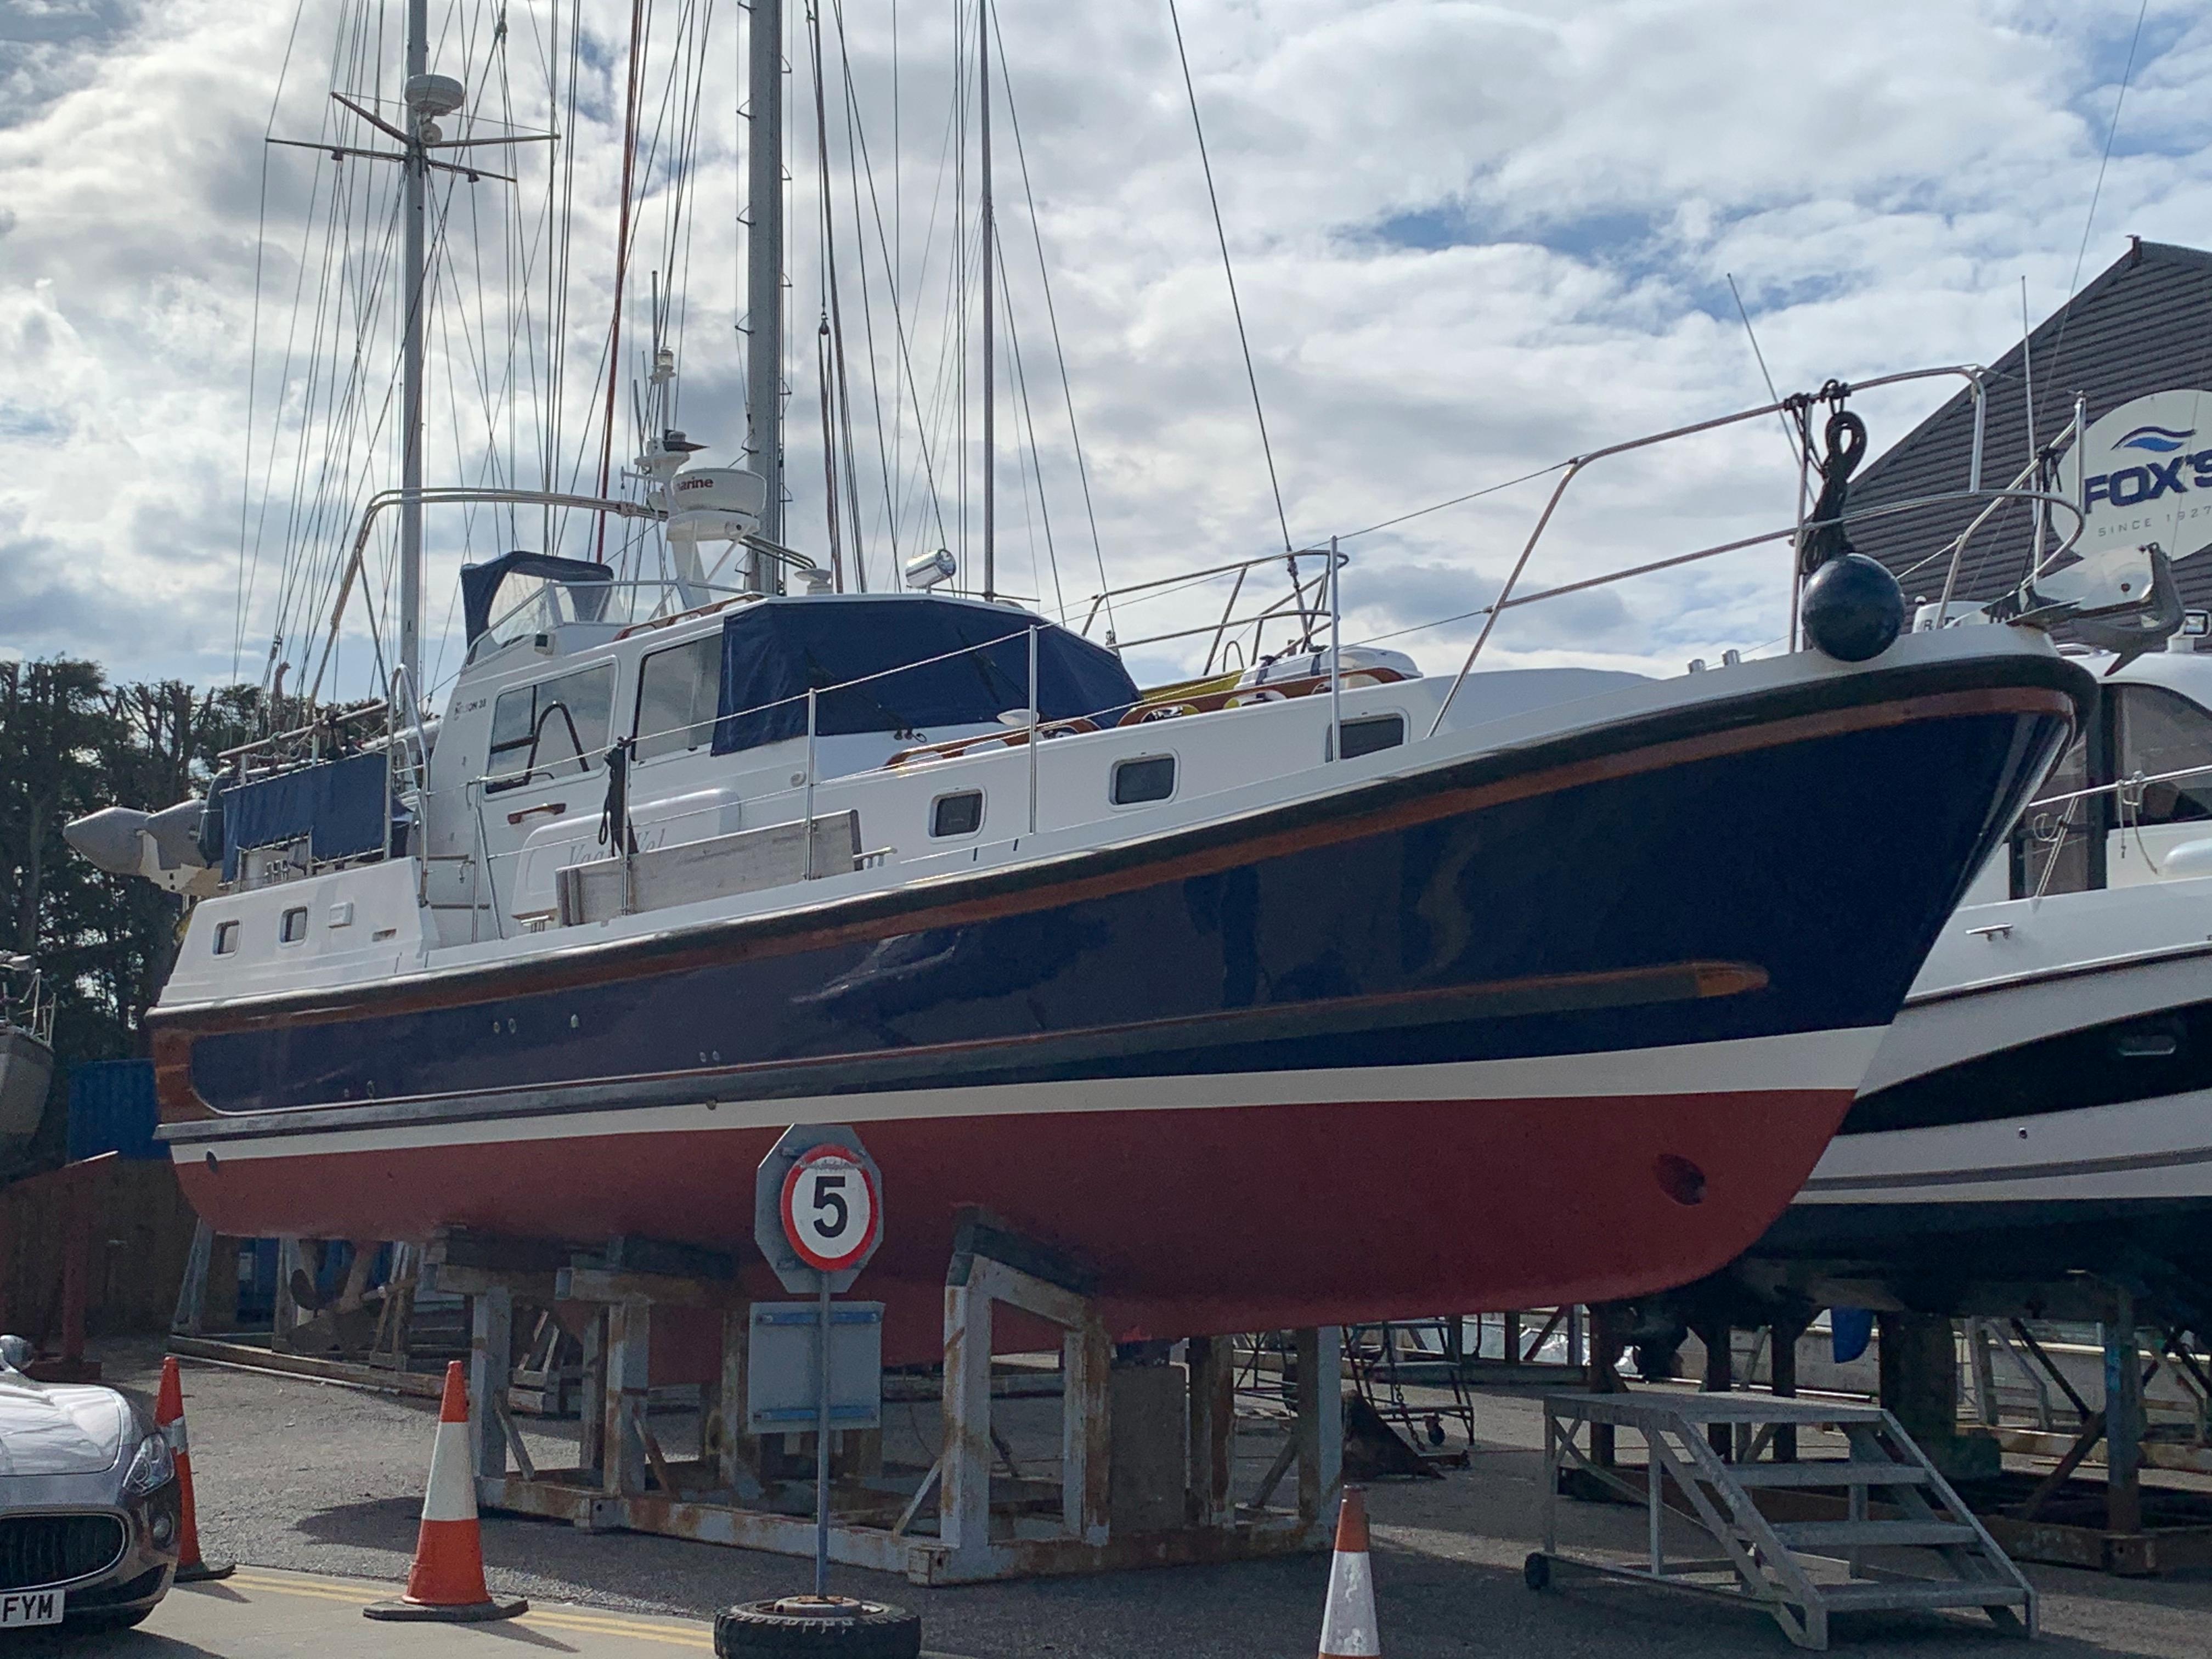 nelson yachts for sale uk